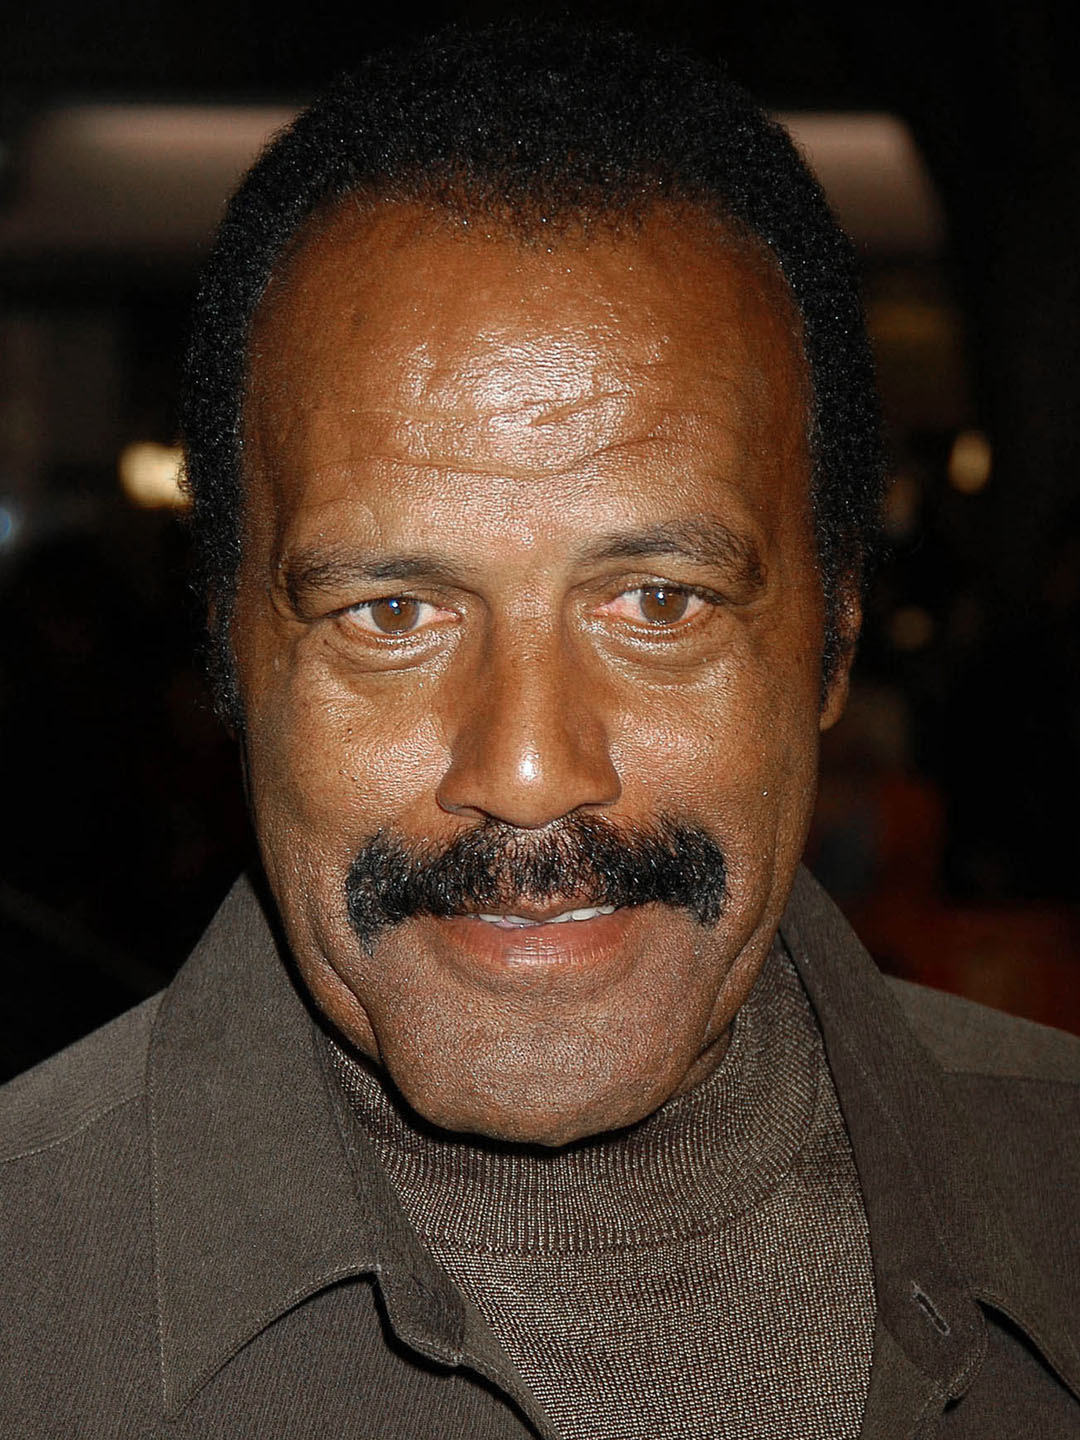 Fred Williamson American Actor